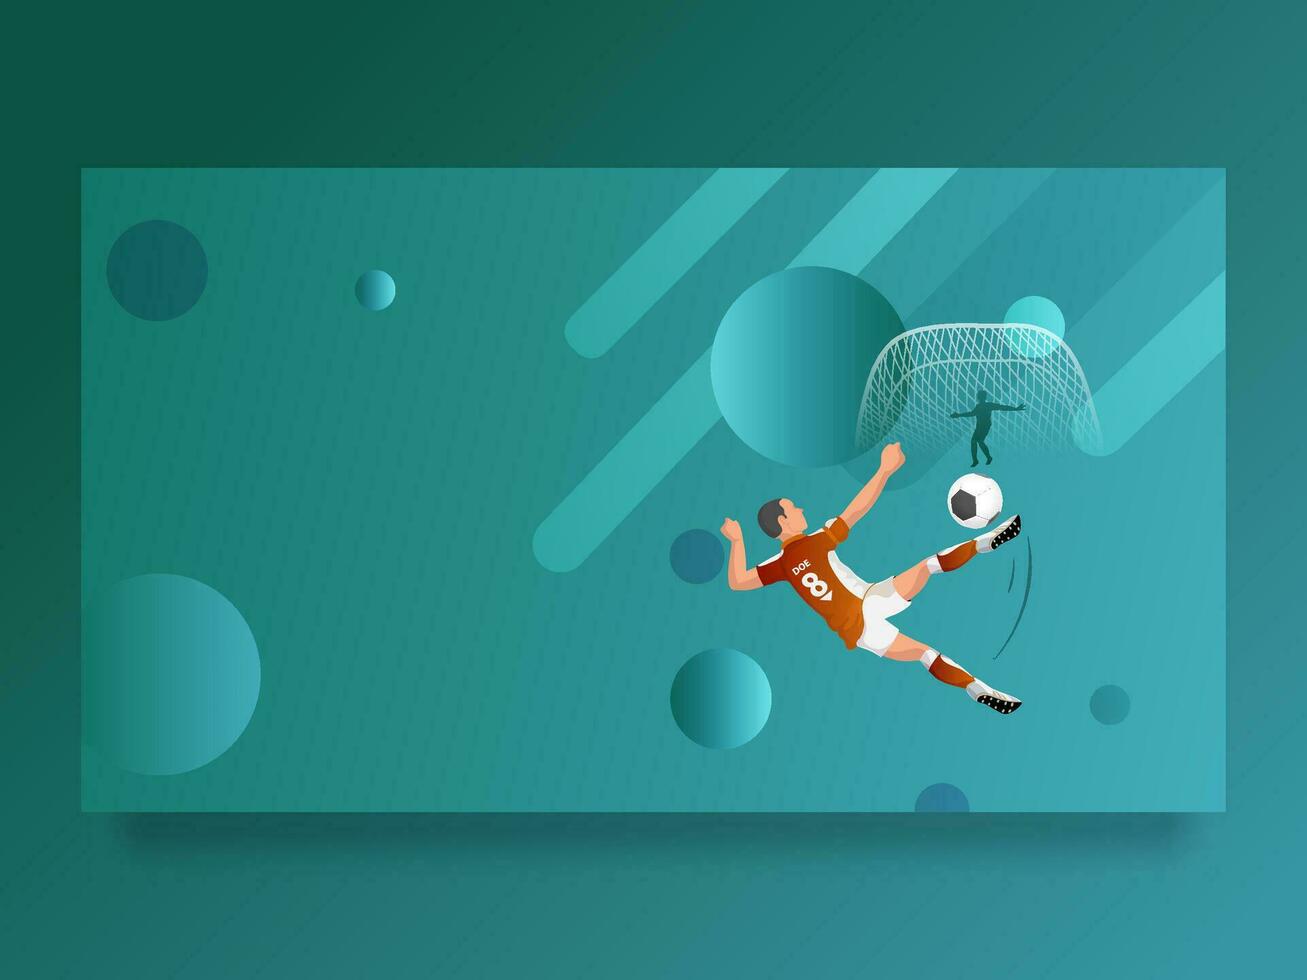 Action View of Basketball Player Character Kicking In Goal Net on Teal Abstract Background and Space for Your Message. Basketball Game Responsive Template of Poster Design. vector